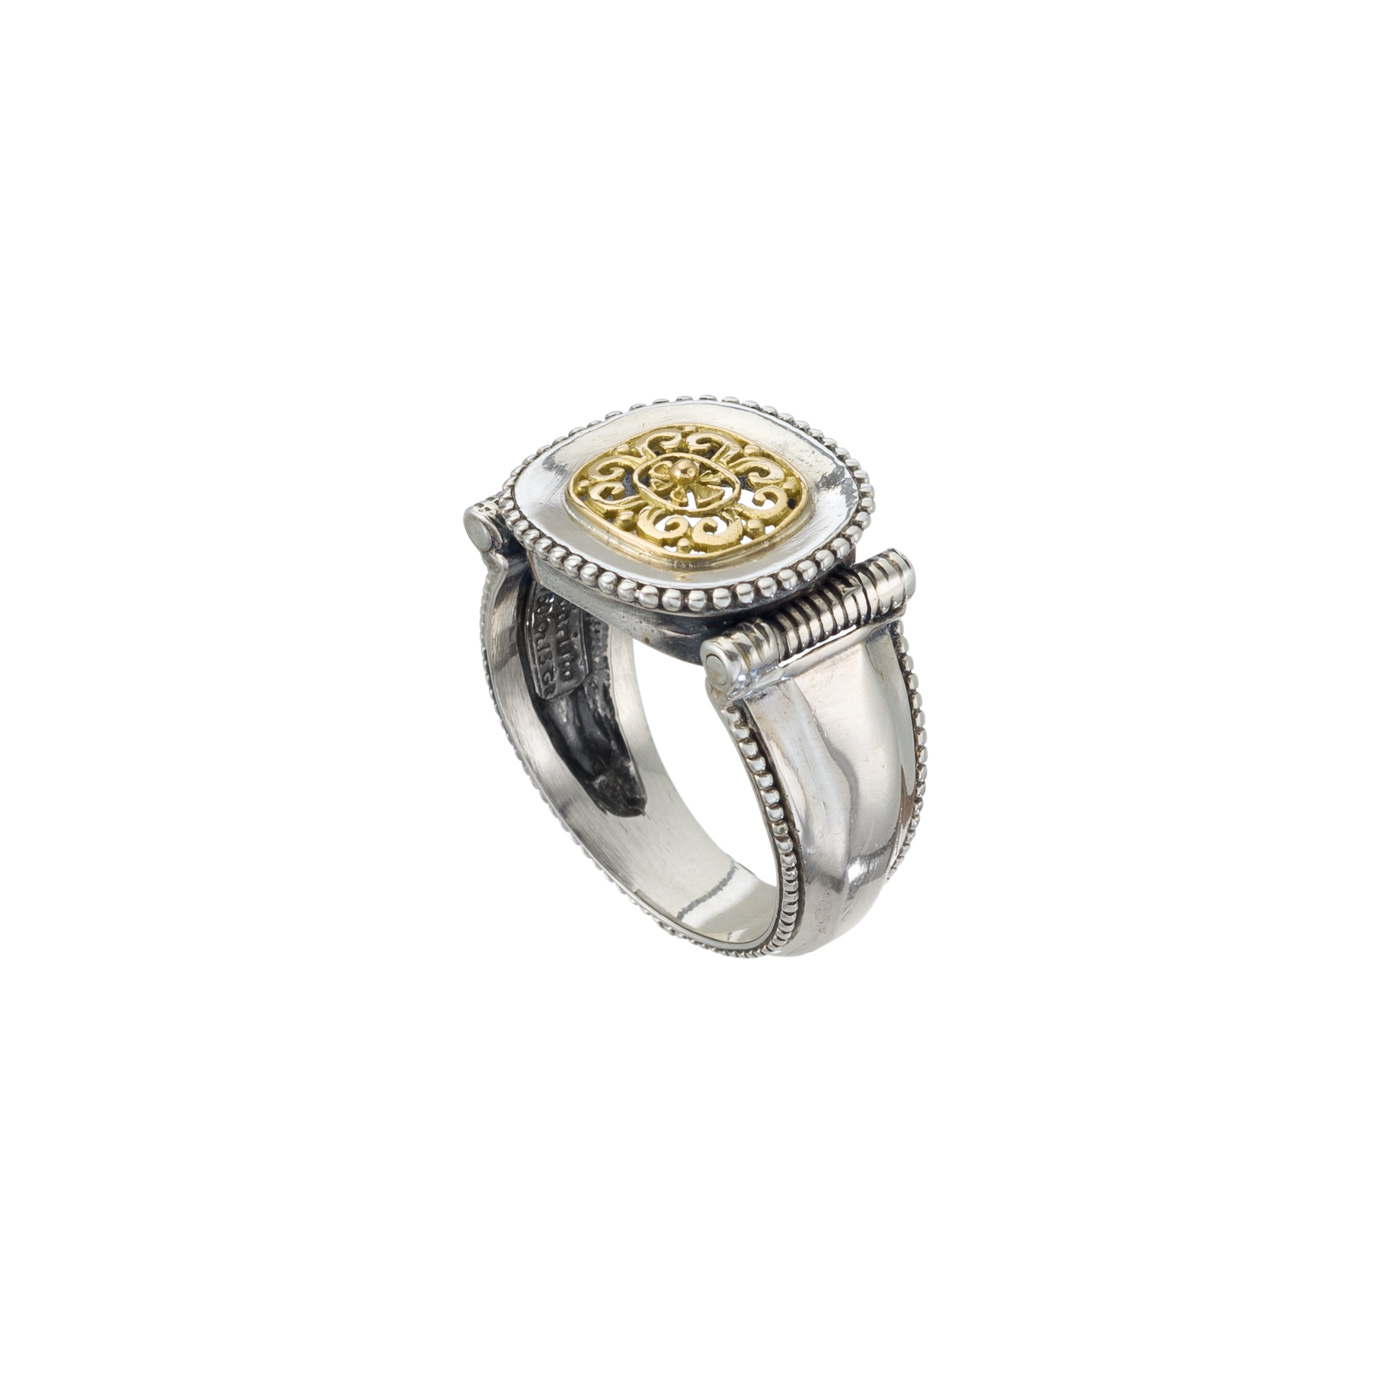 Classic oval ring in 18K Gold and Sterling Silver